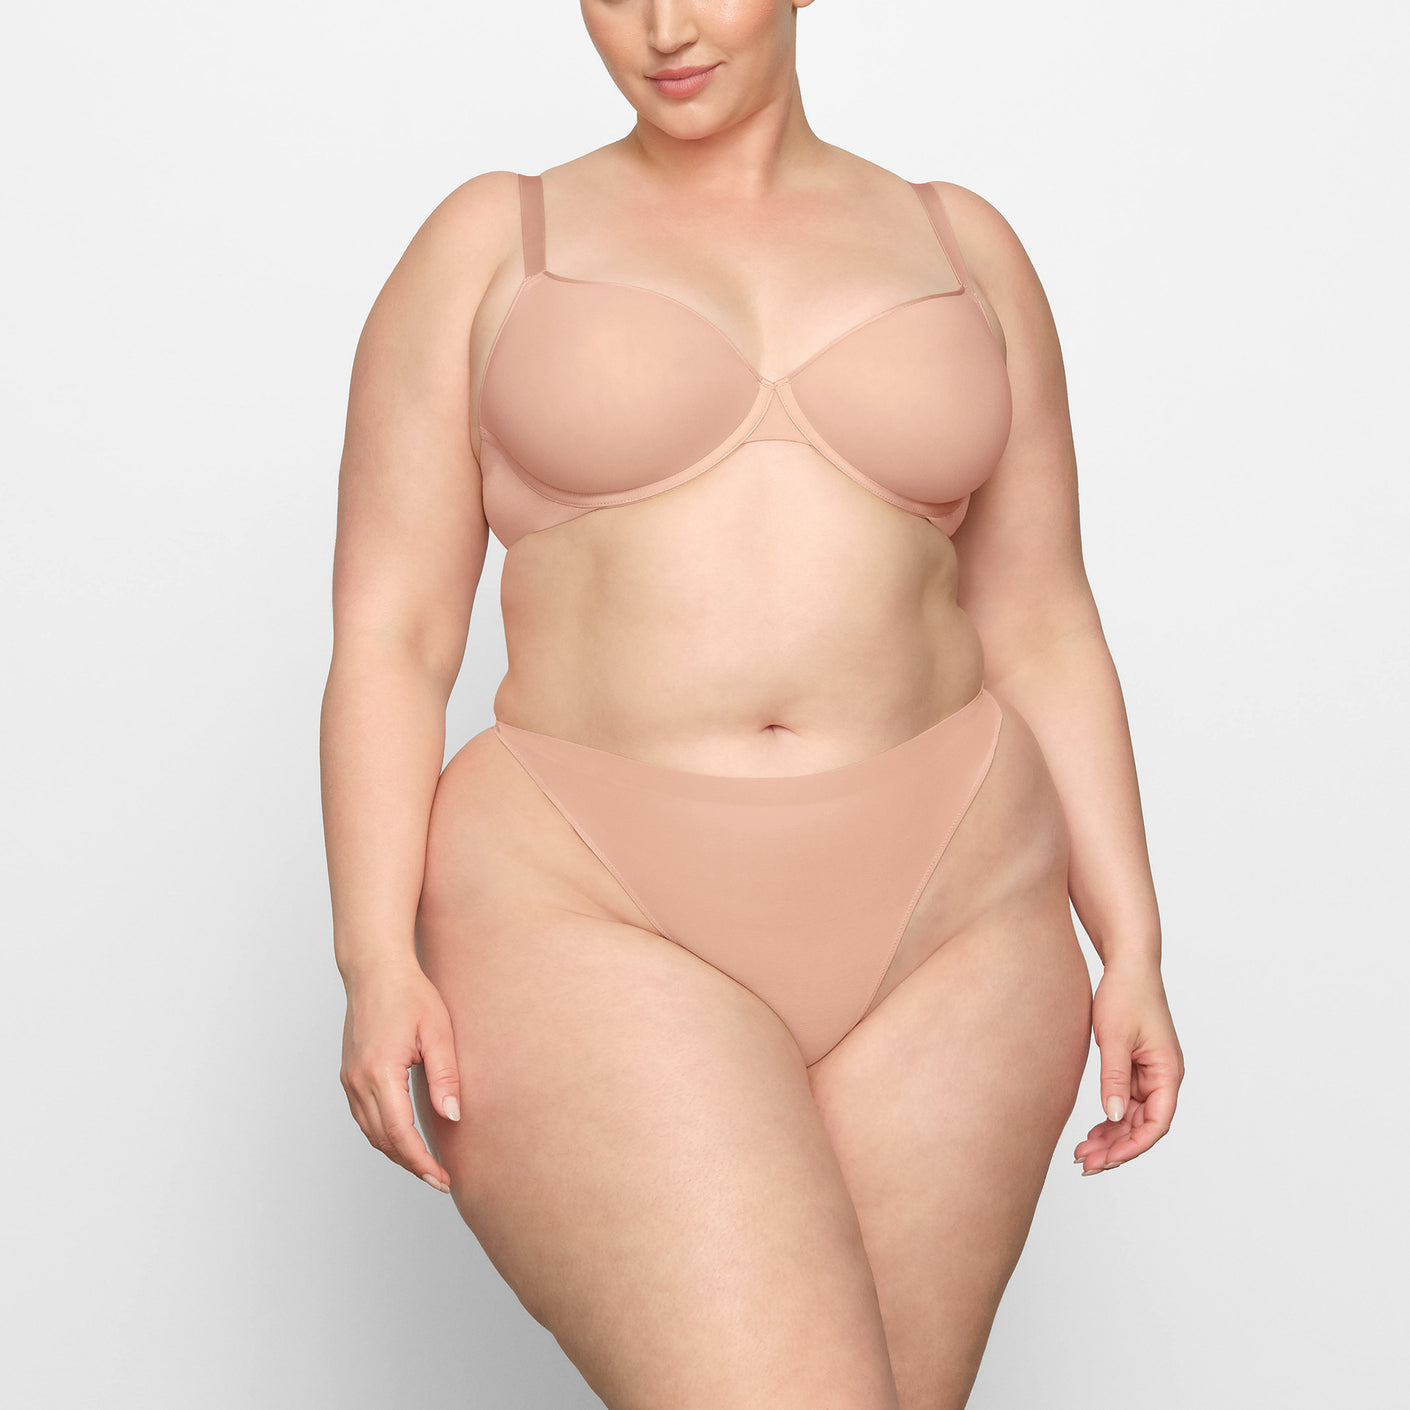 SKIMS bras launching today! wearing the weightless demi bra and